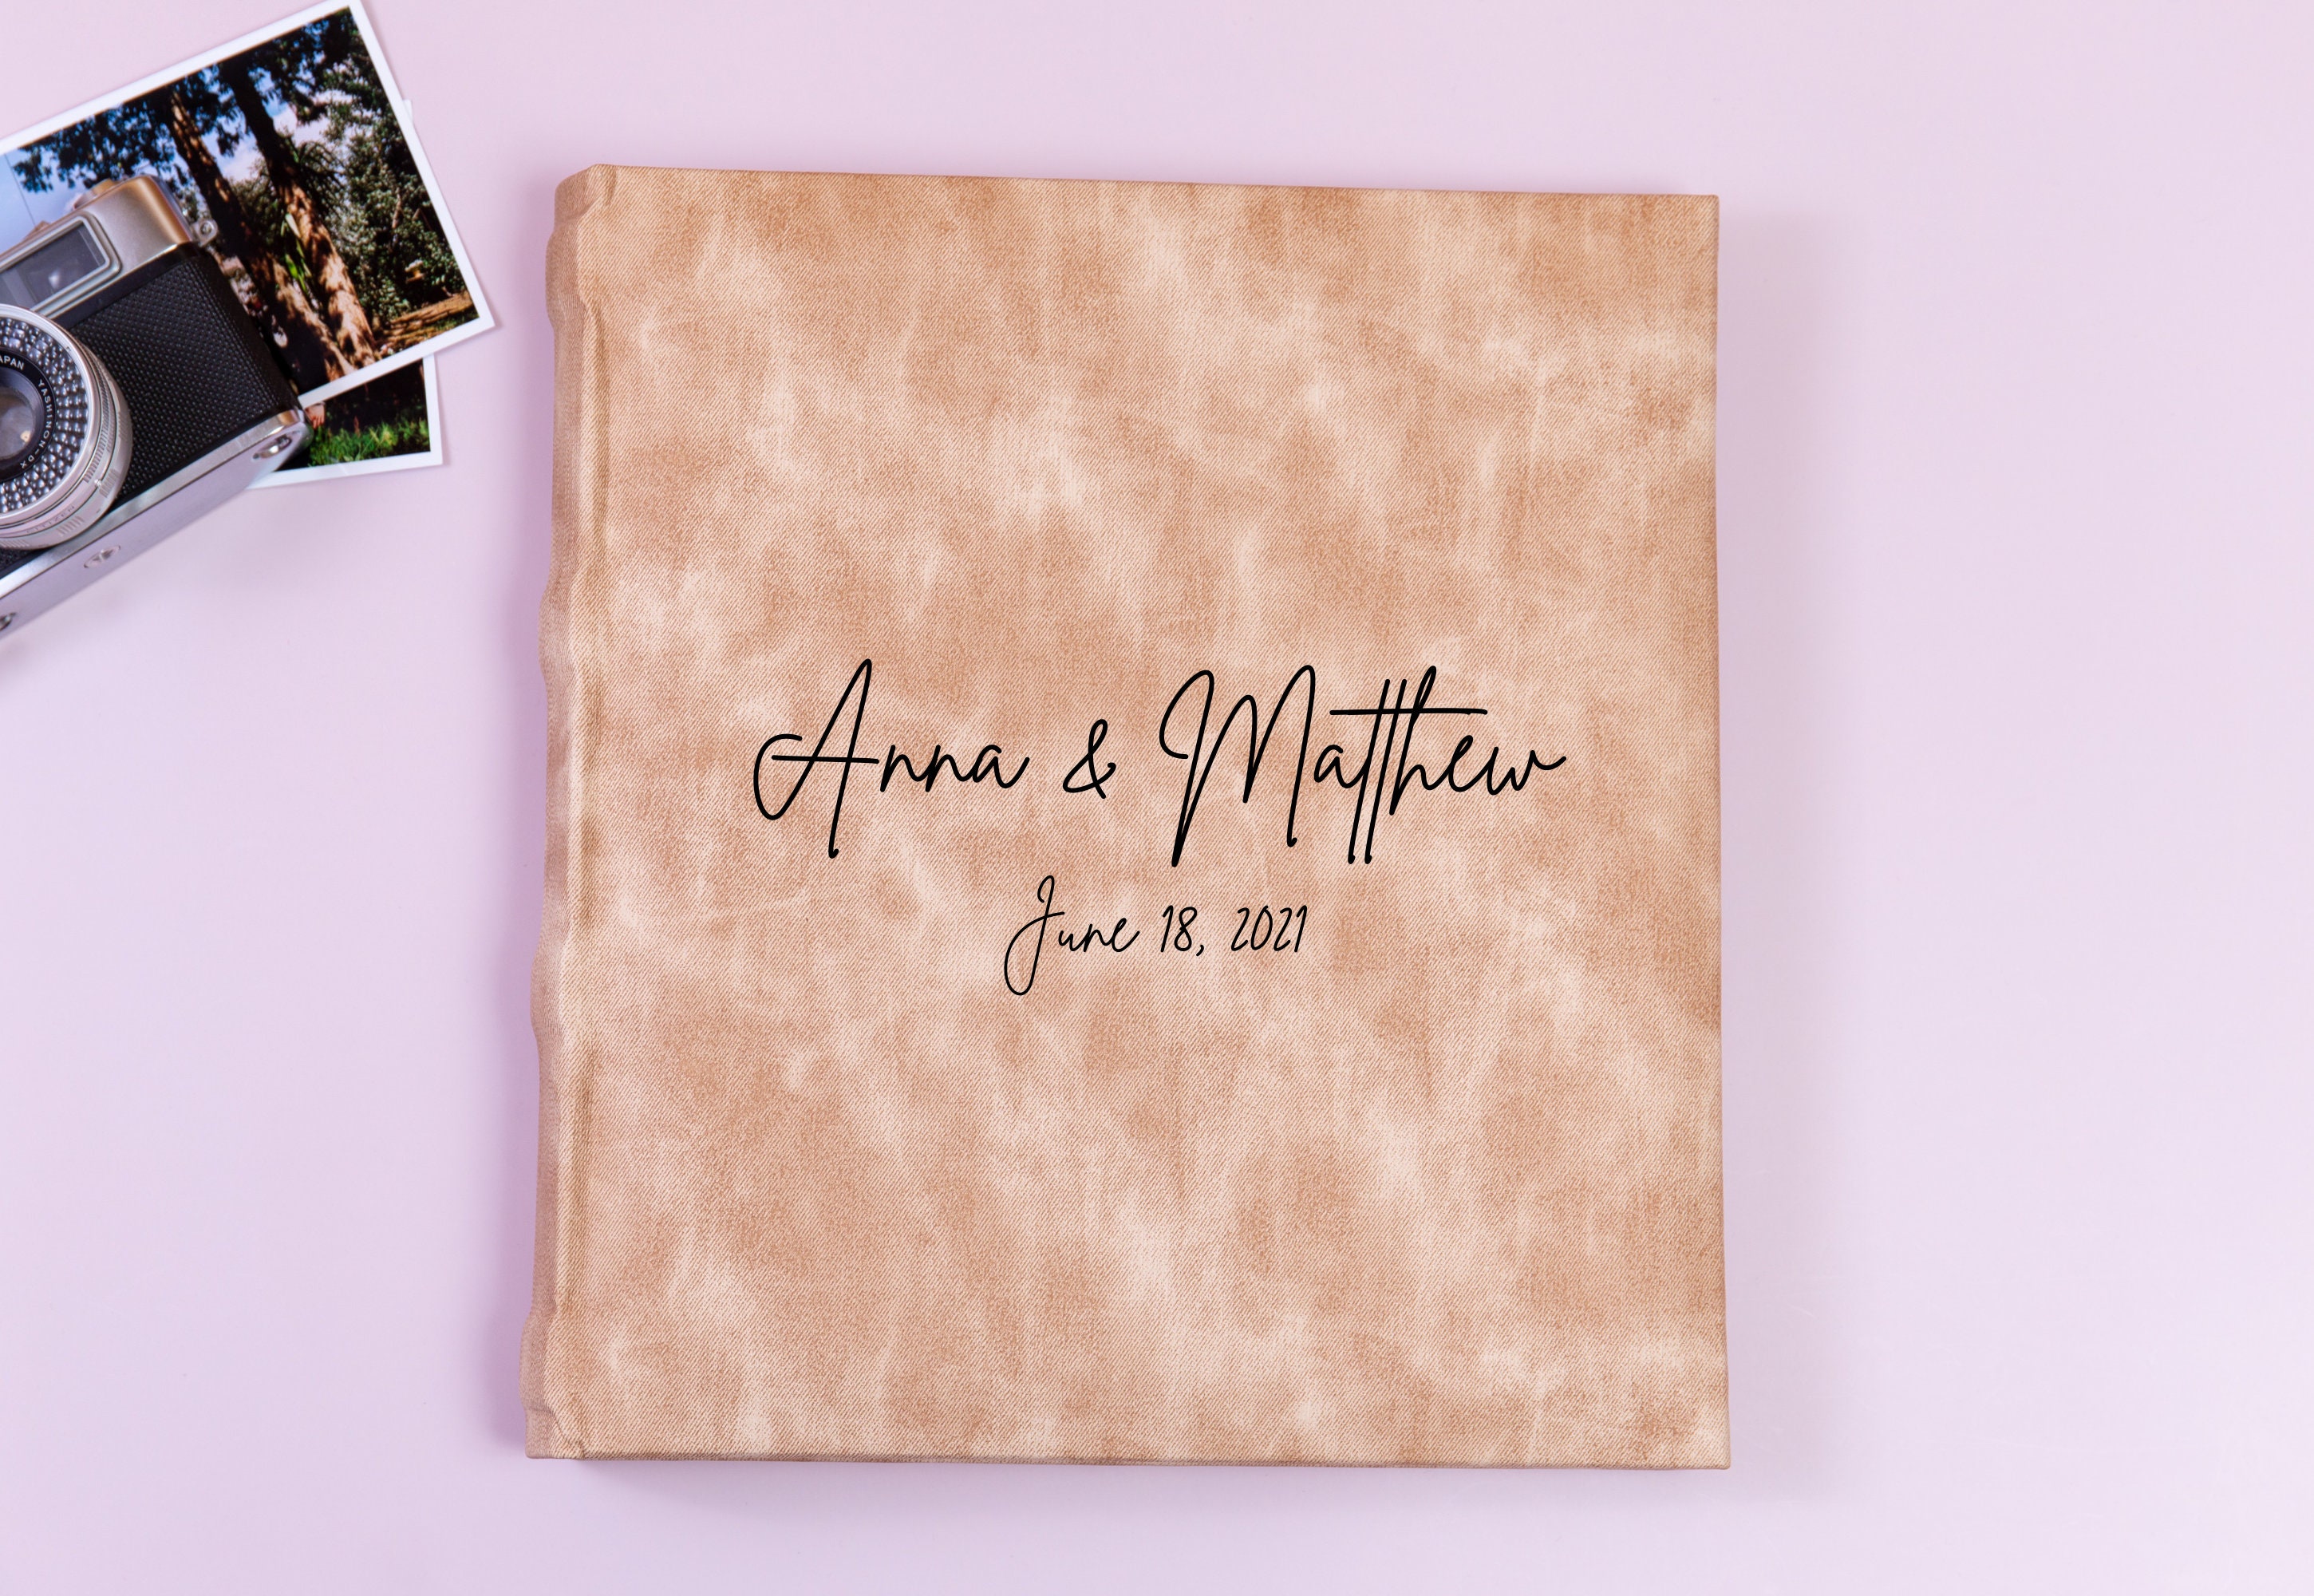 Personalized 4x6 Photo Album for 500 Photos. Large Wedding Photo Album With  500 4x6 Slip-in Sleeves. Vertical and Horizontal Photo Pockets 